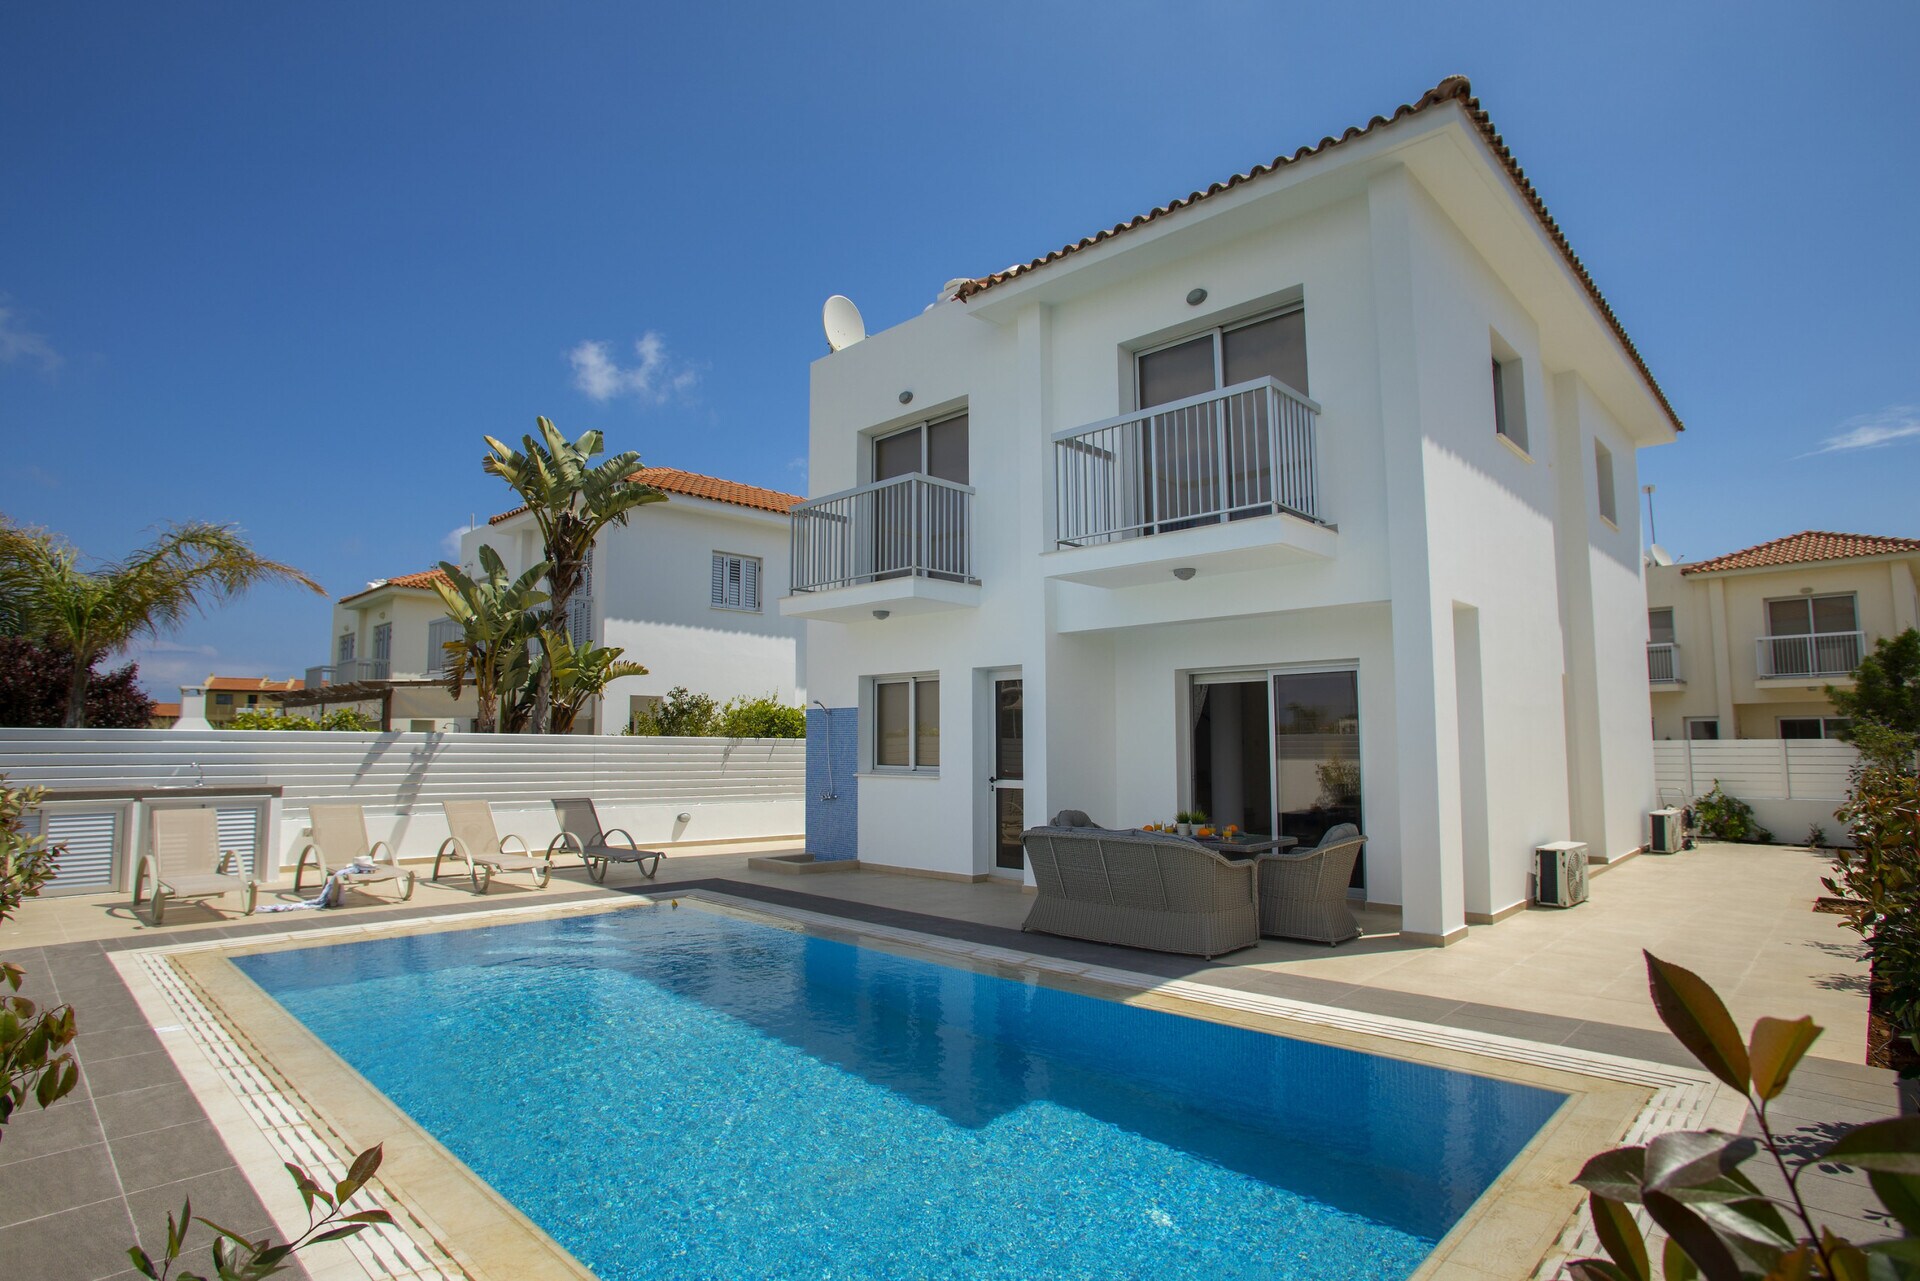 Property Image 1 - Imagine You and Your Family Renting this Luxury Villa minutes from the Beach, Protaras Villa 1470